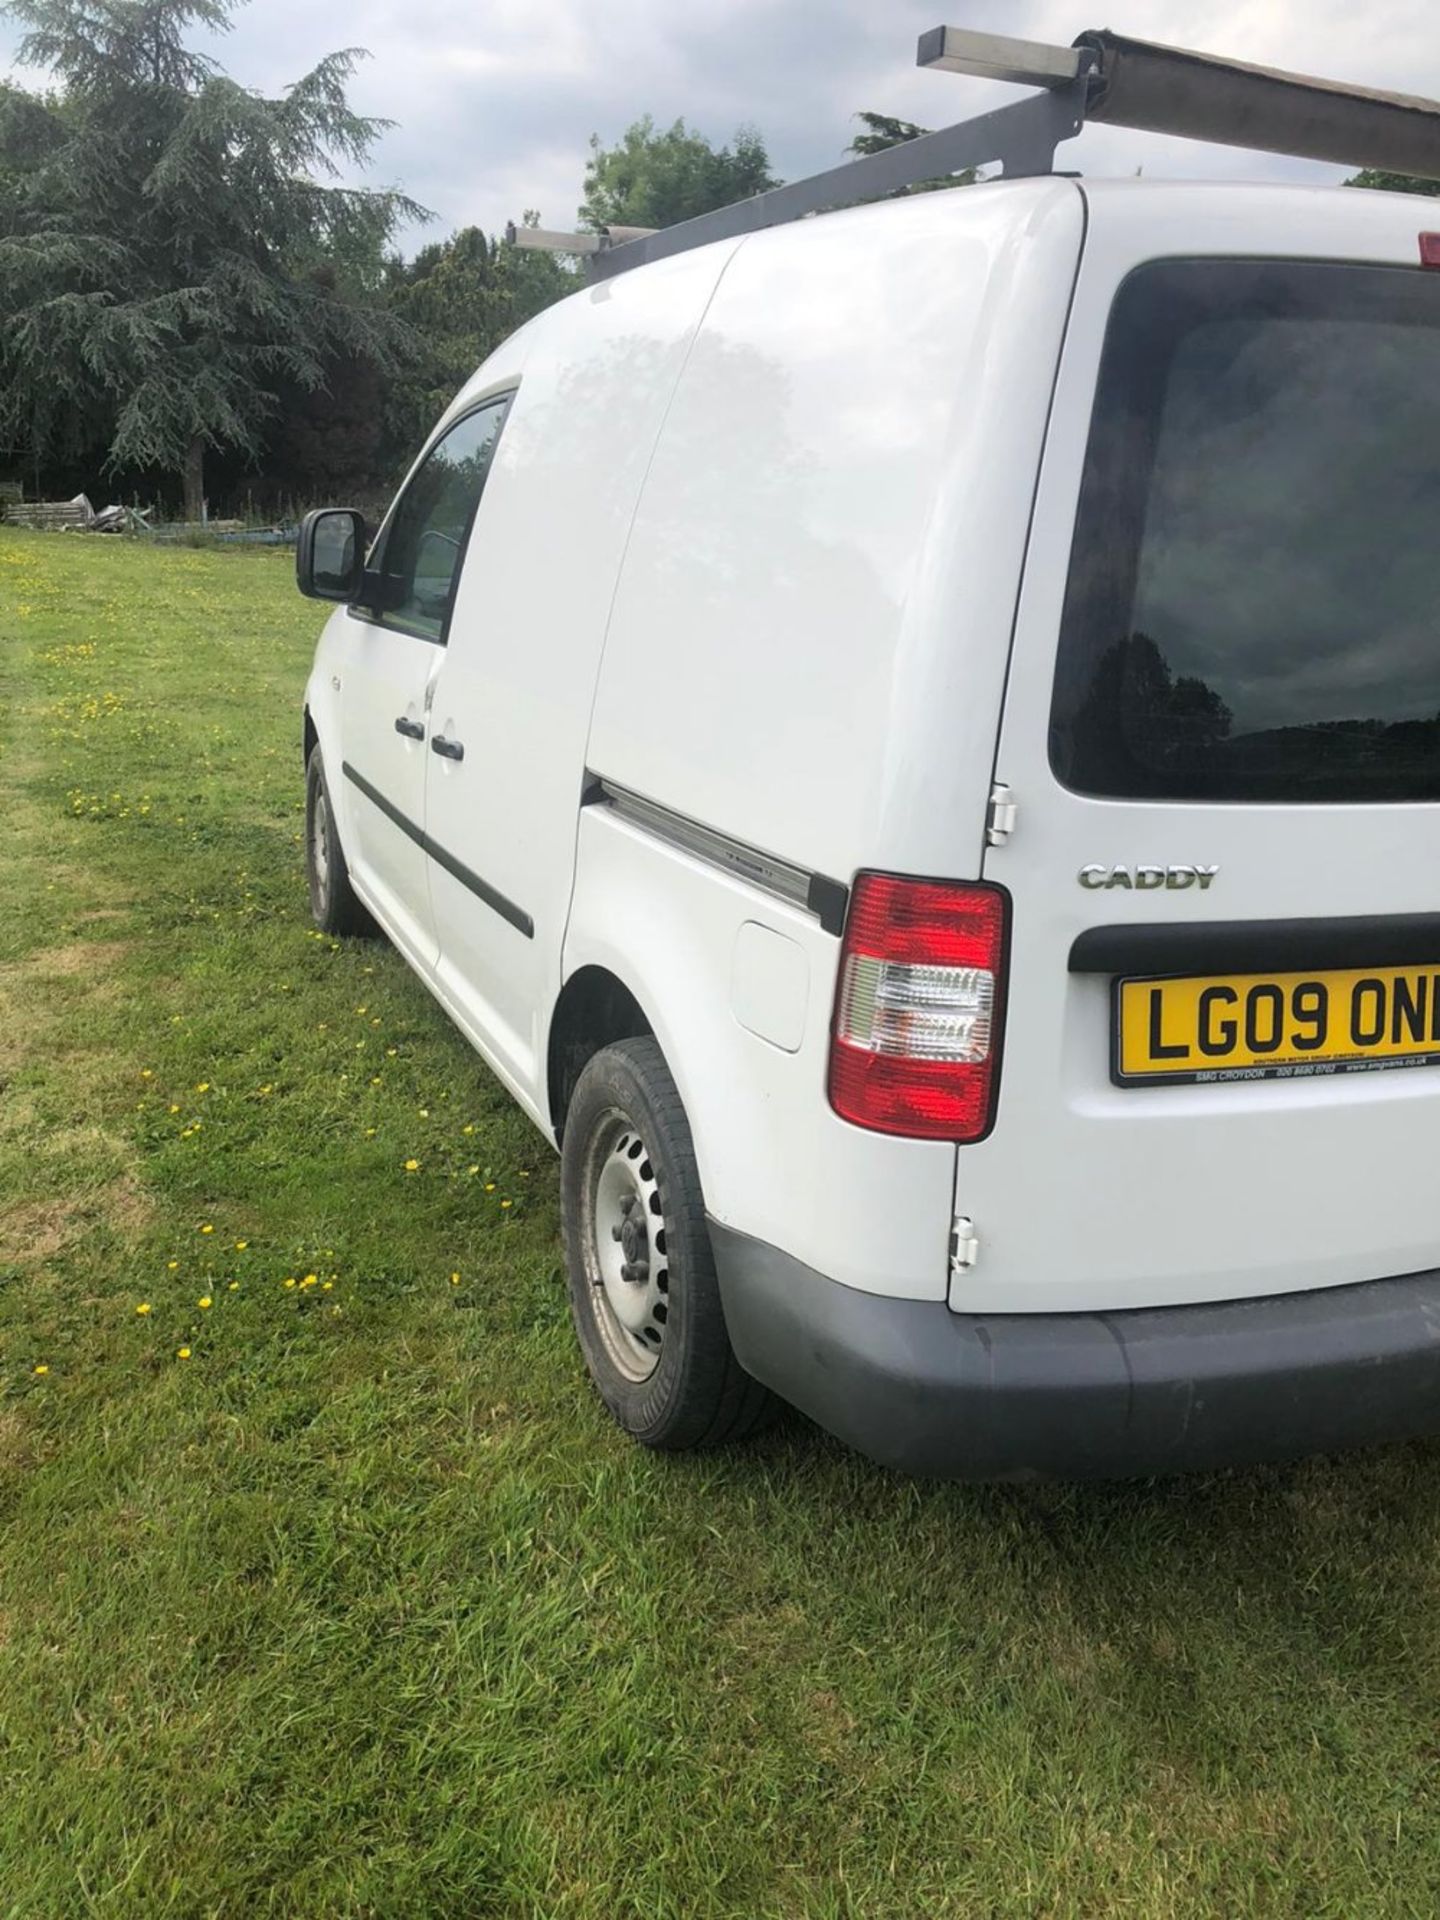 VOLKSWAGON CADDY PANEL VAN REG:LG09 0NL WITH V5 AND TESTED UNTIL SEPTEMBER 137051 REC MILES. PLEASE - Image 6 of 16